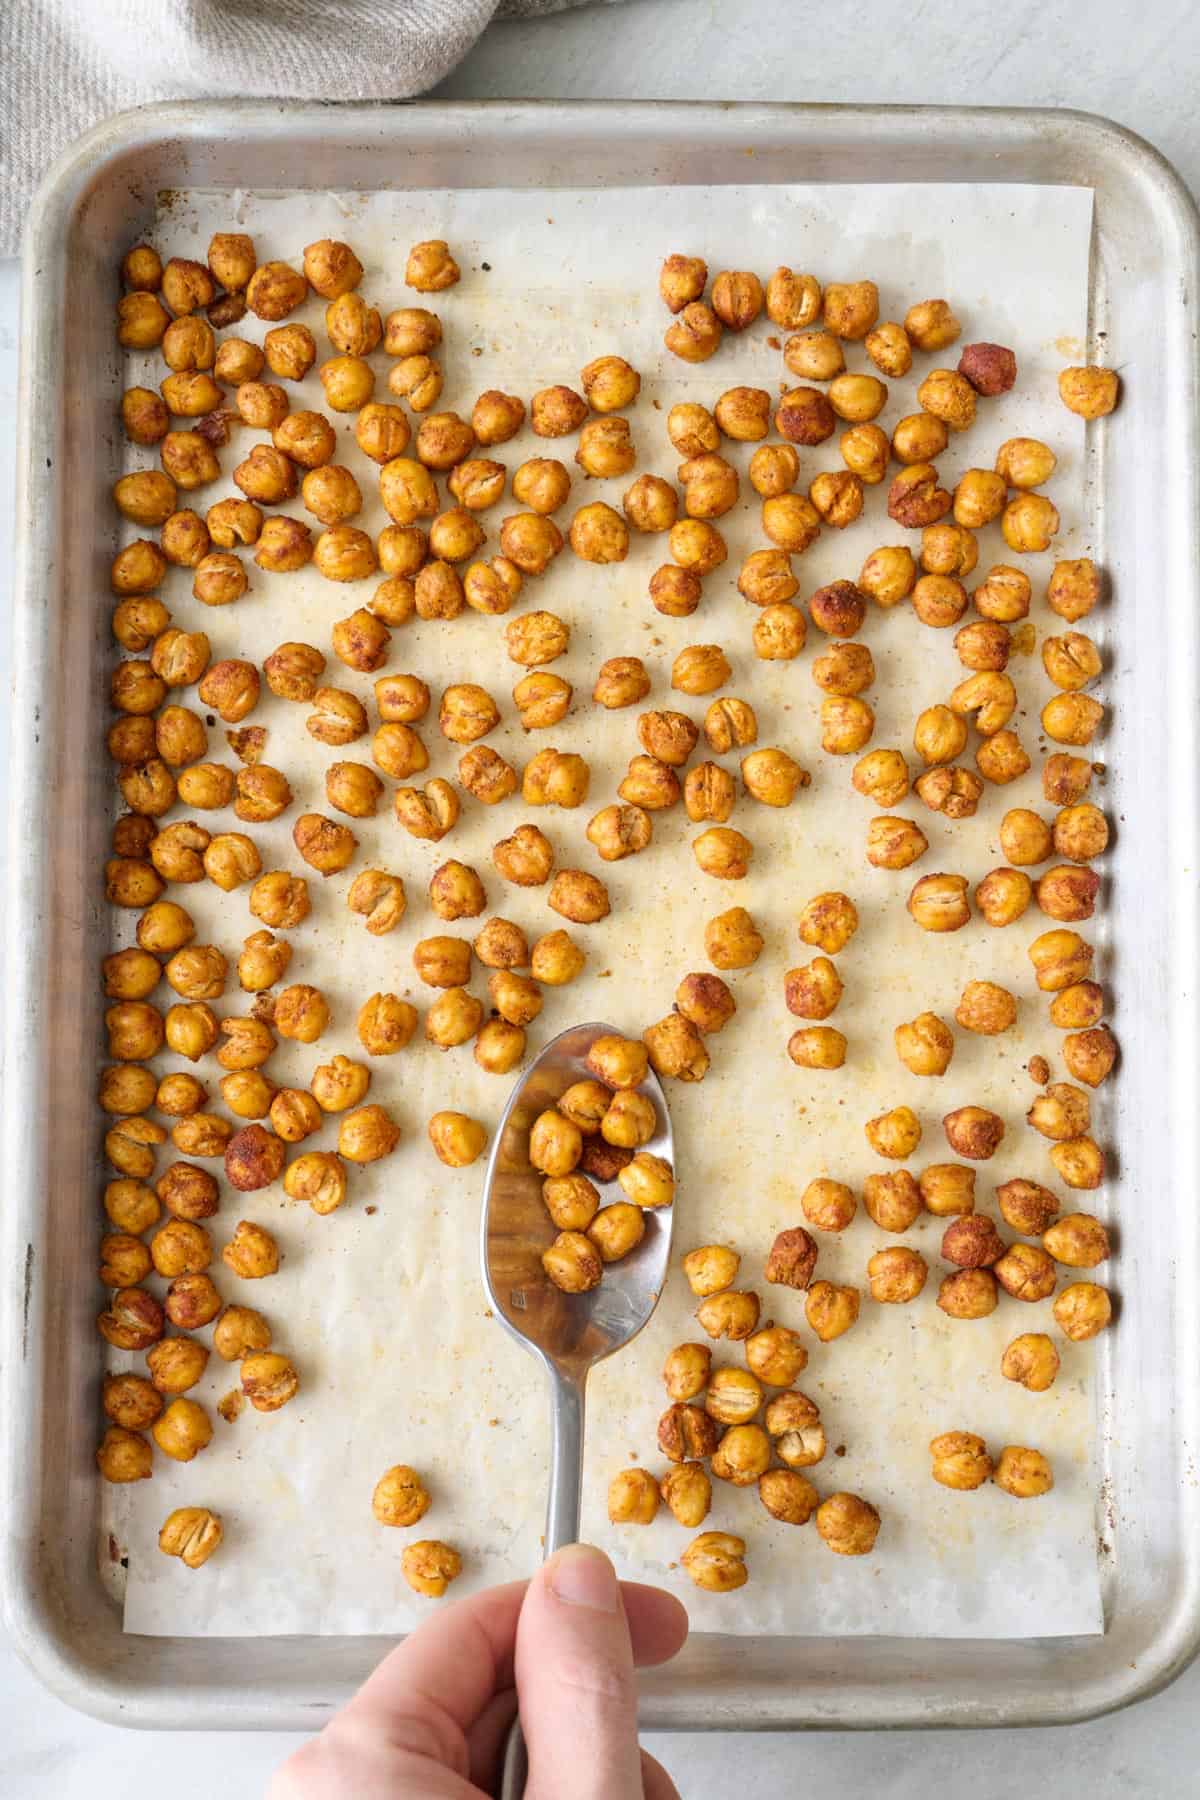 4 bowls of roasted chickpeas each with different spices